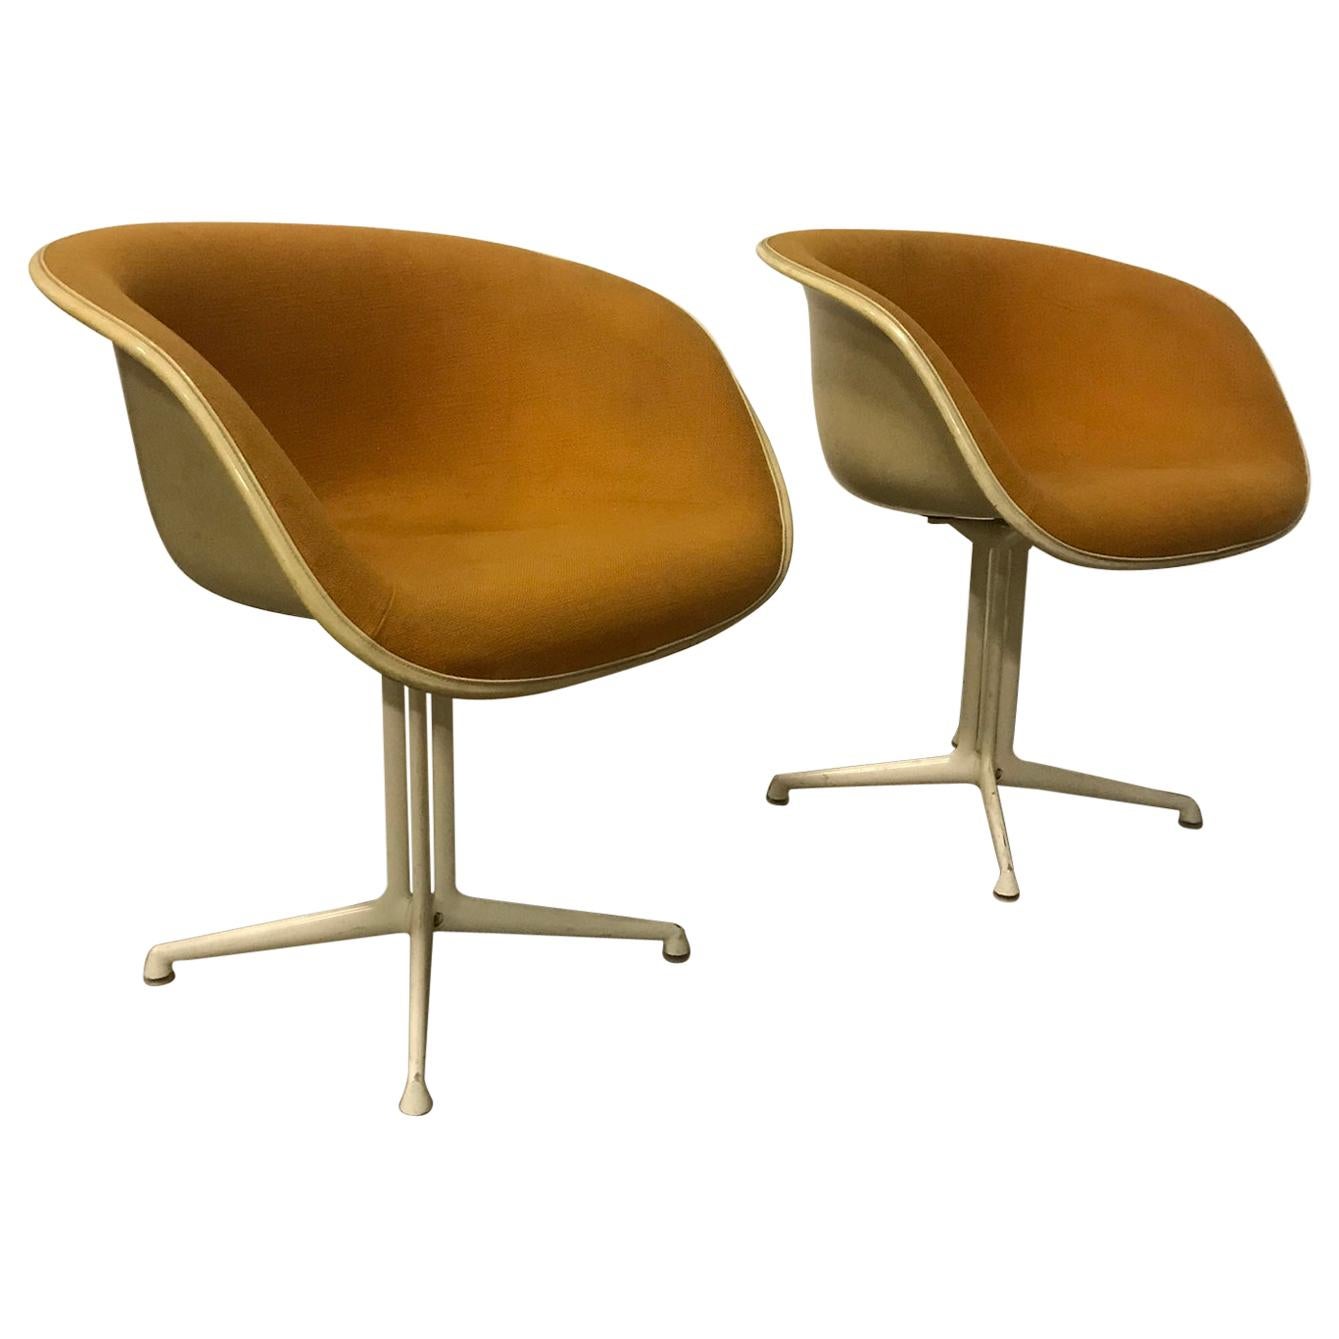 1960, Ray and Charles Eames, Original La Fonda Chairs by Miller in First Fabric